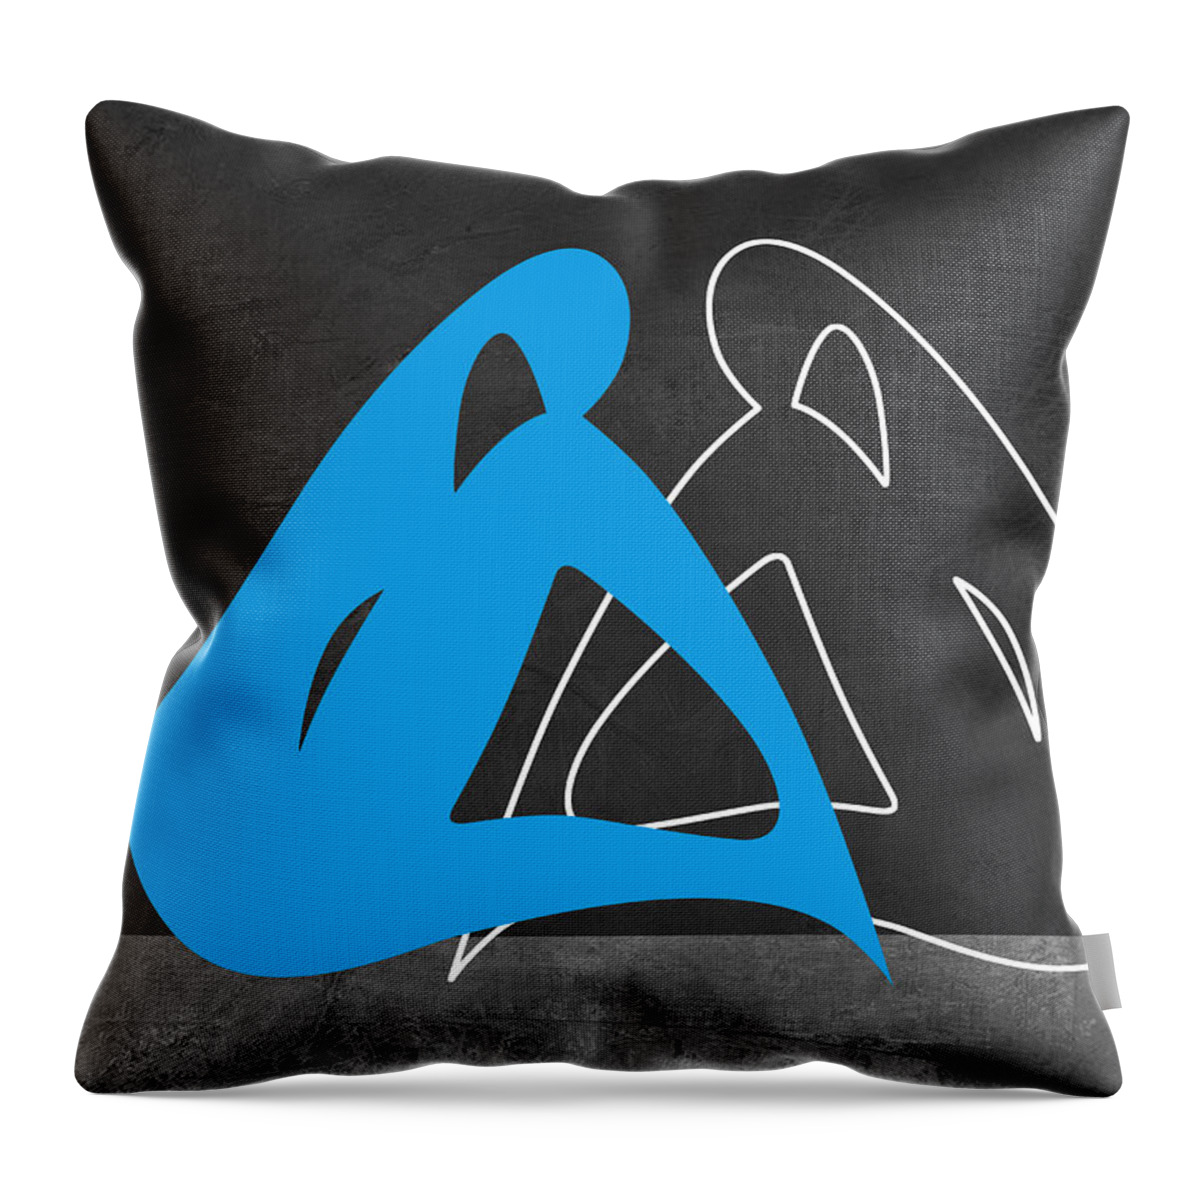 Abstract Throw Pillow featuring the painting Blue Woman by Naxart Studio